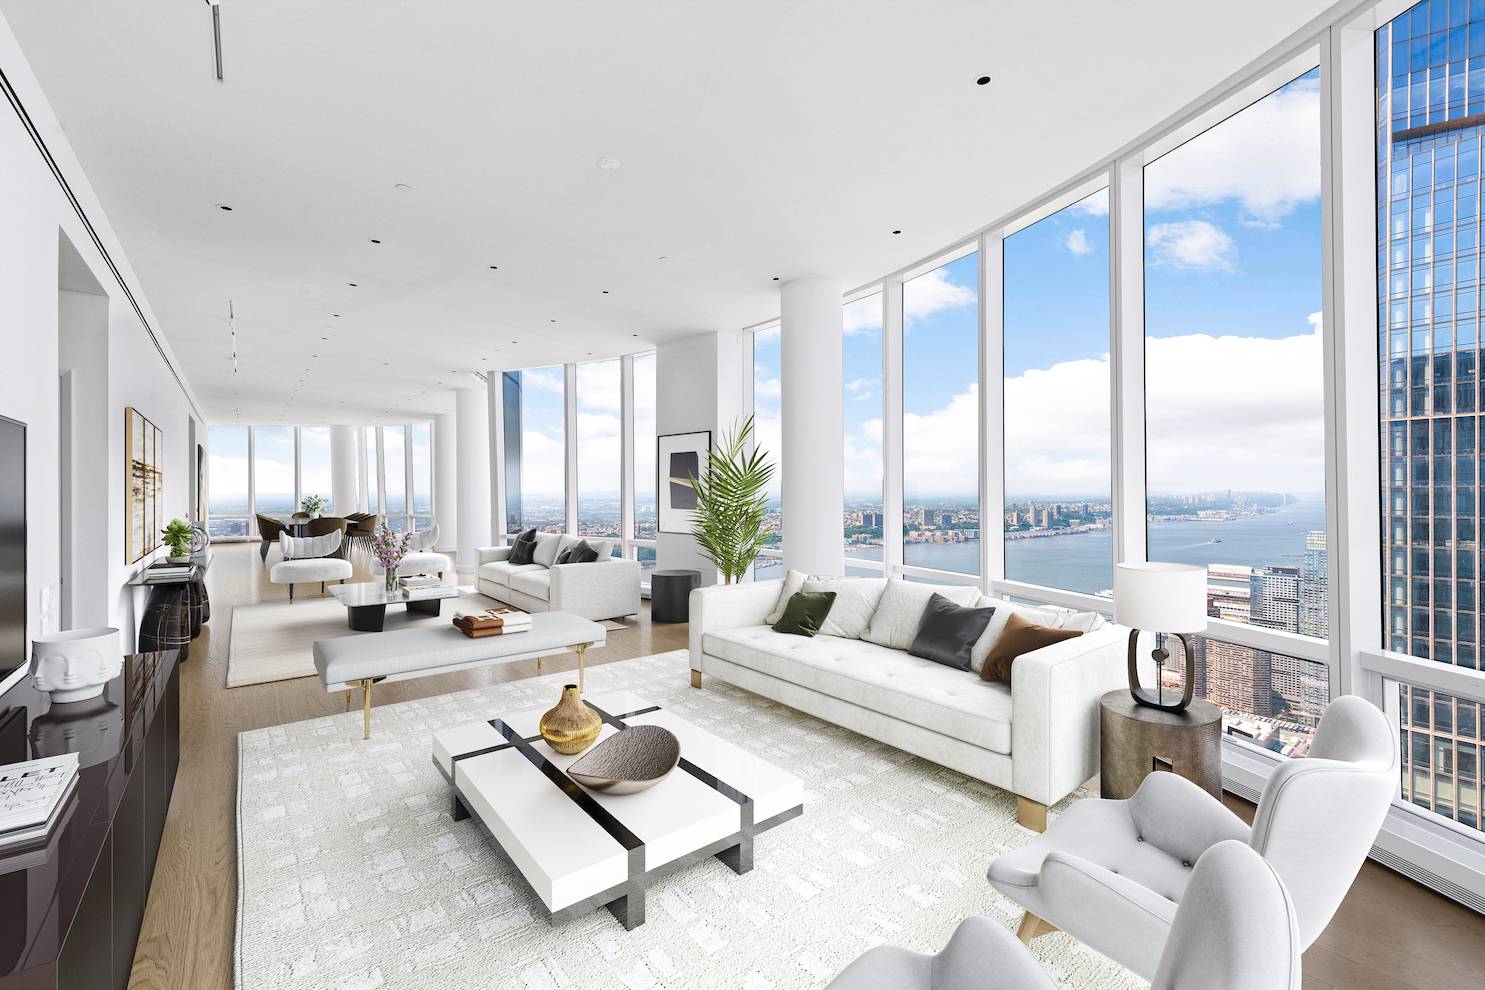 Welcome to the epitome of luxury living at 15 Hudson Yards.